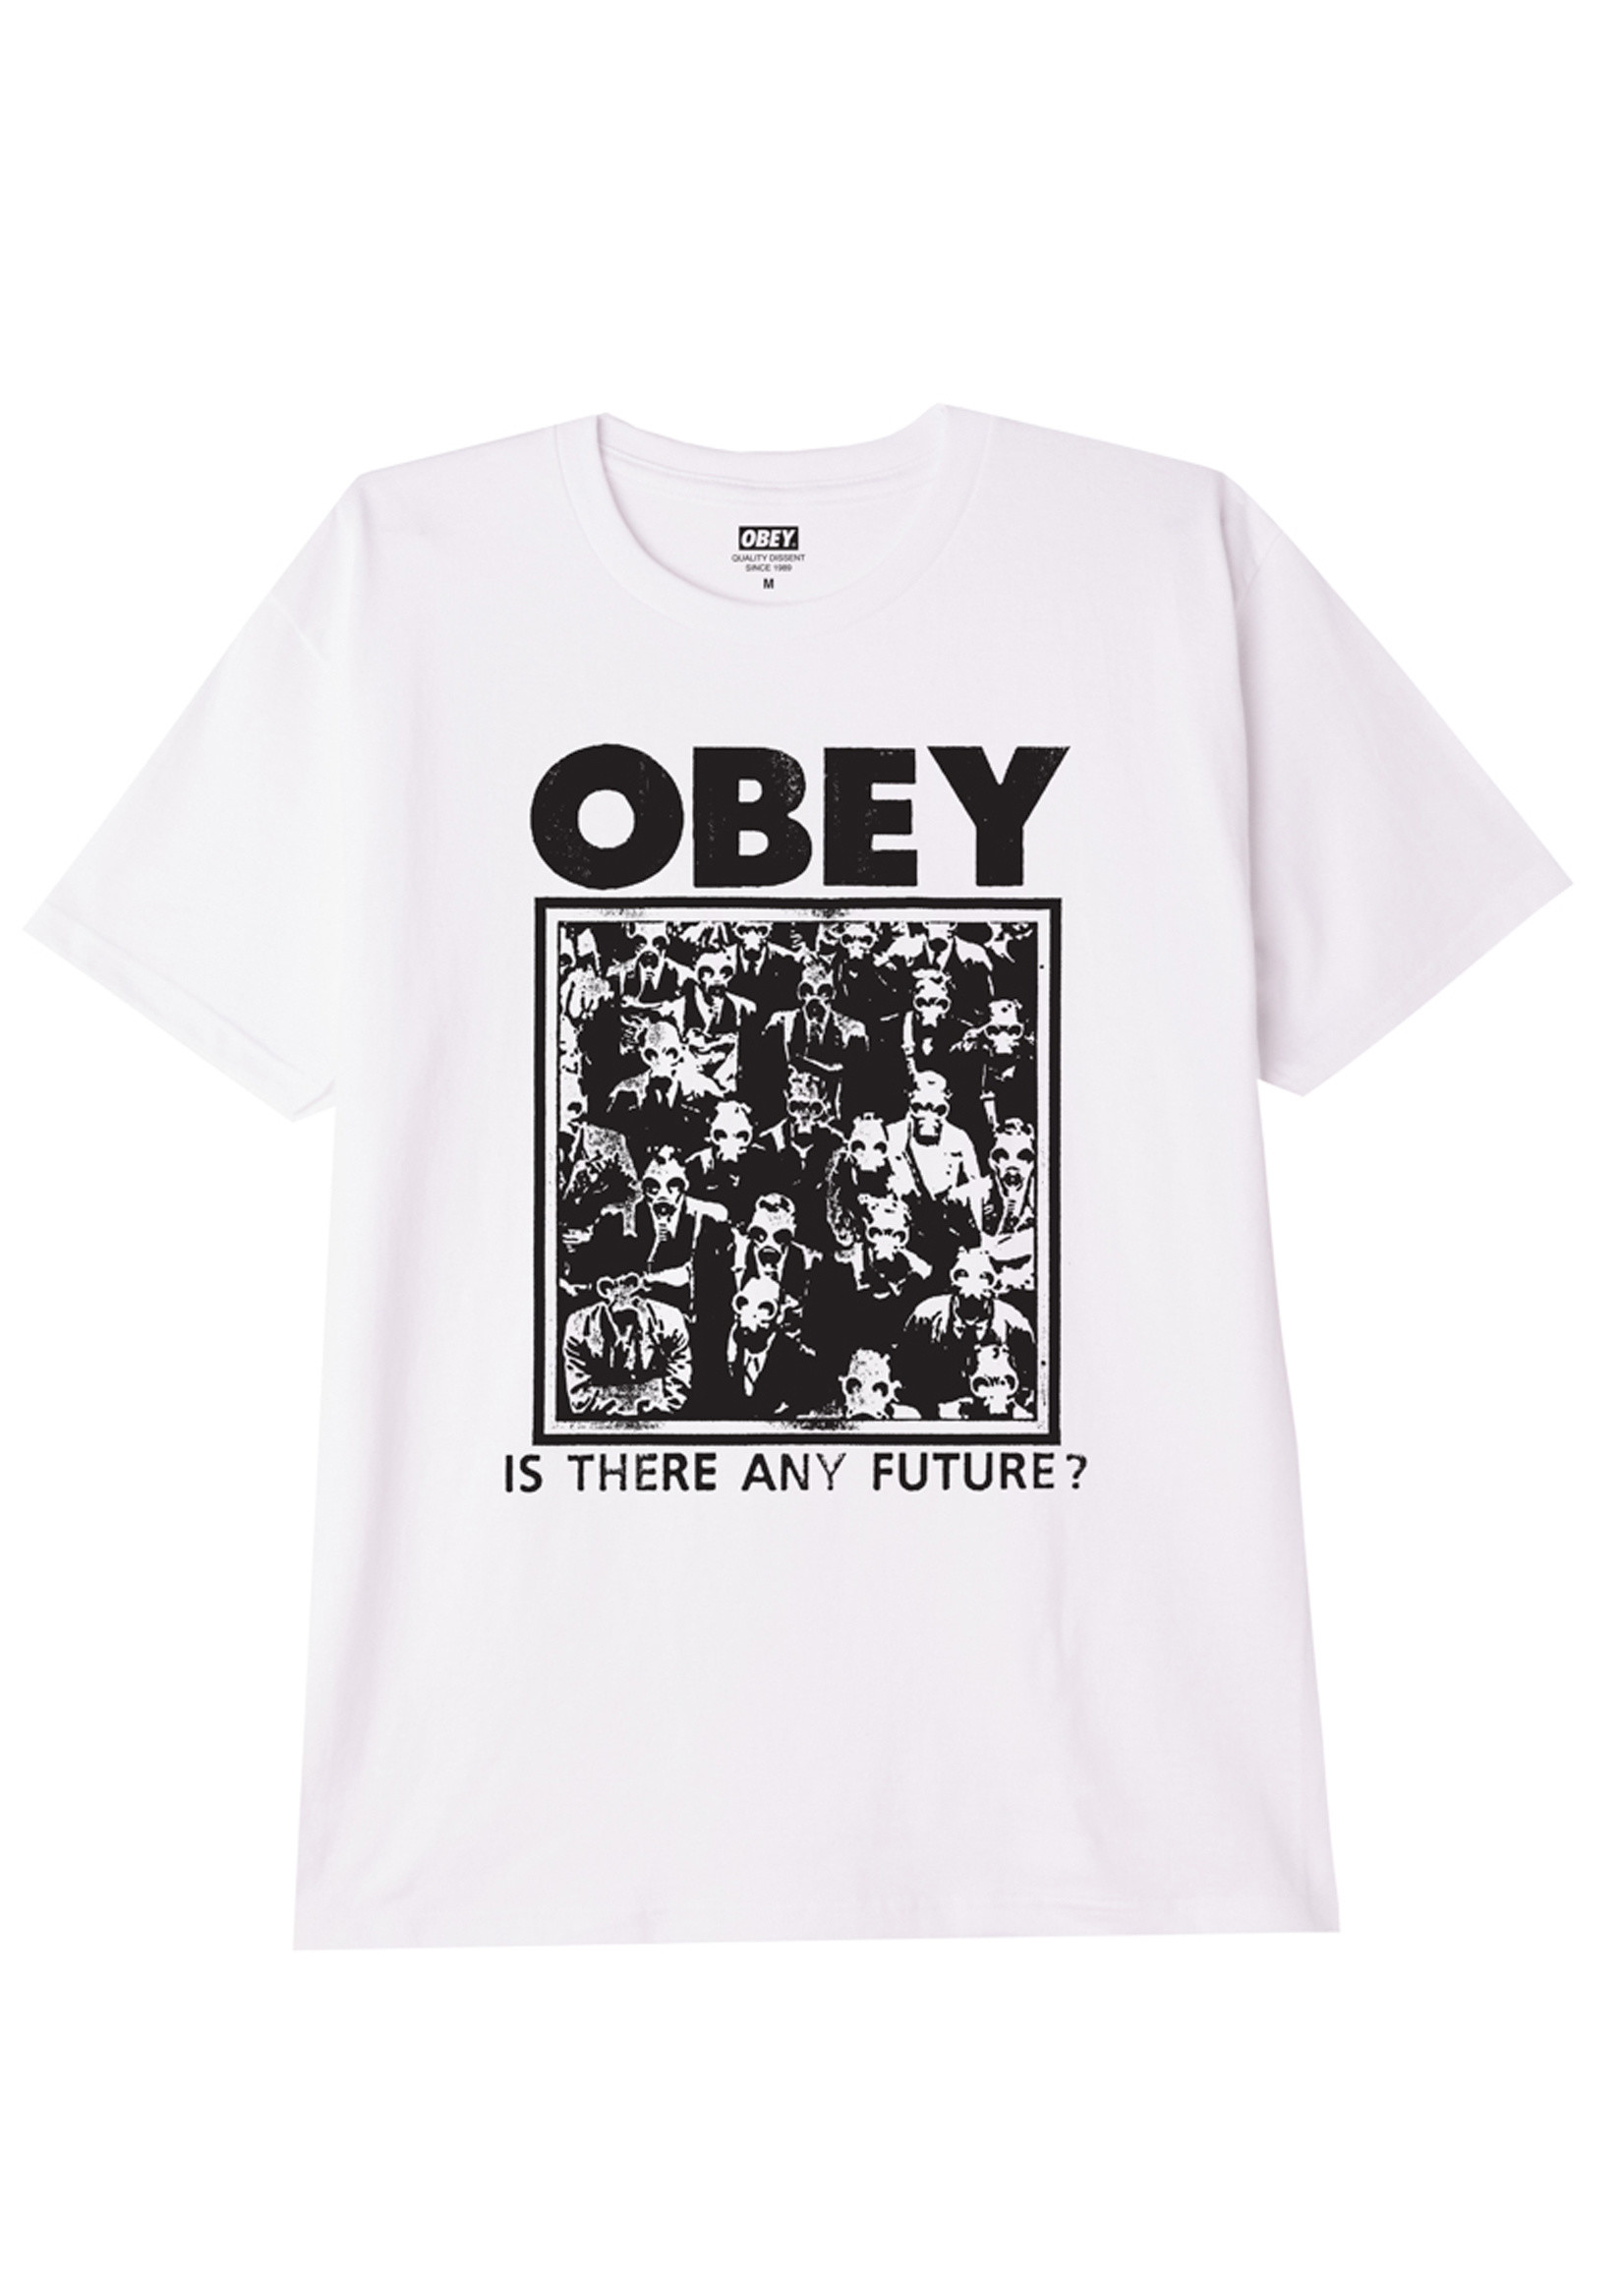 OBEY OBEY / Is There Any Future Tee